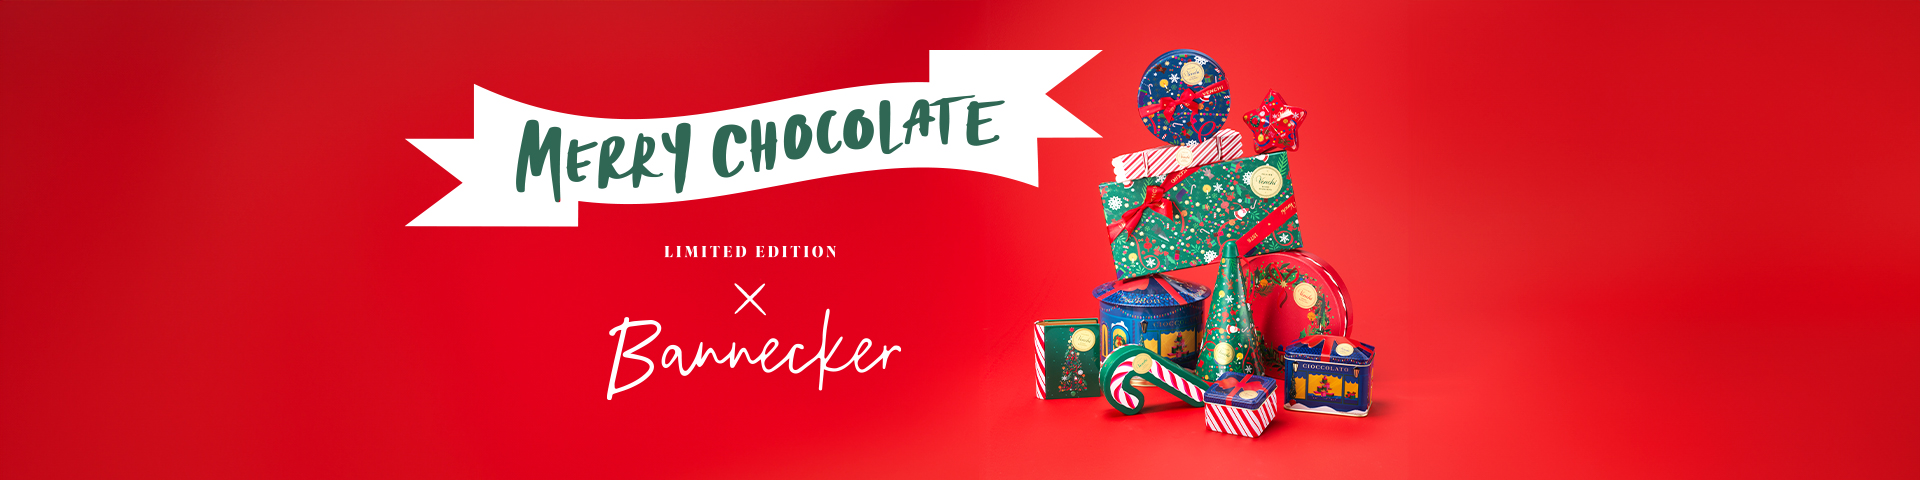 Merry Chocolate limited edition x Bannecker